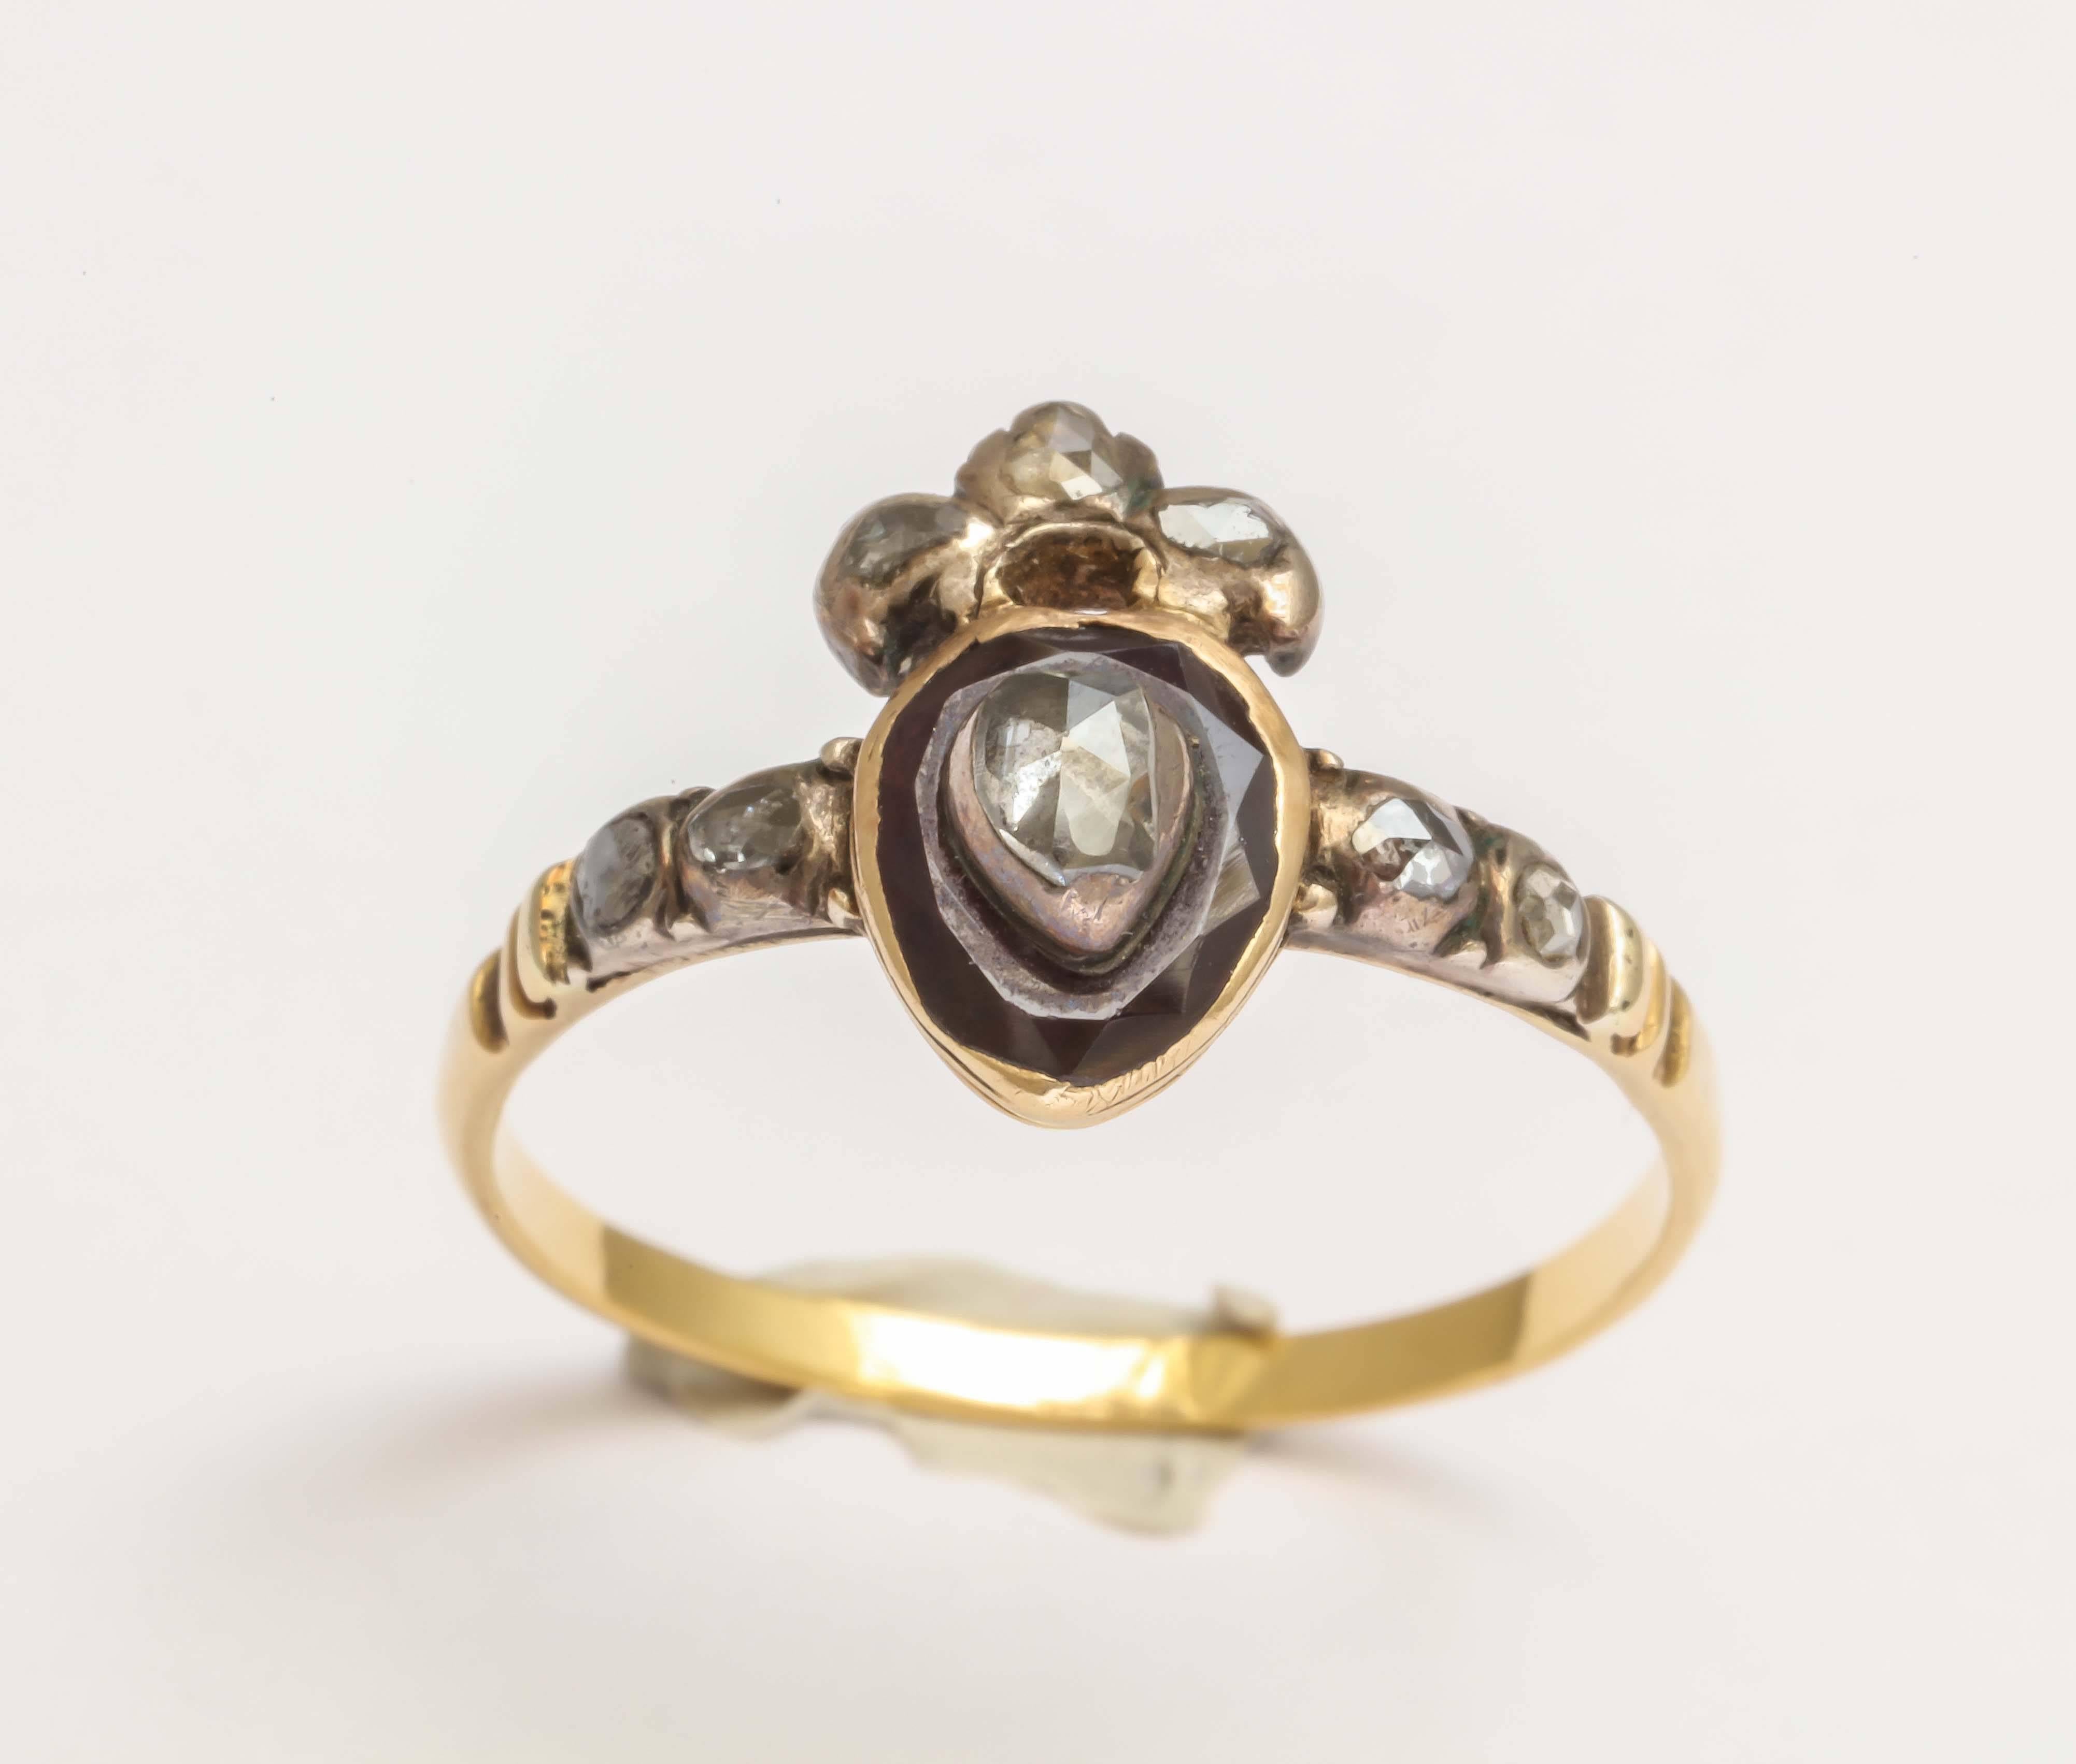 Dating to around 1740, this incredible ring of English origin is designed as a crowned heart. This design symbolizing love and loyalty was a favorite of this period. A rose cut diamond is set into a garnet. Rose cut diamonds are set in the crown and